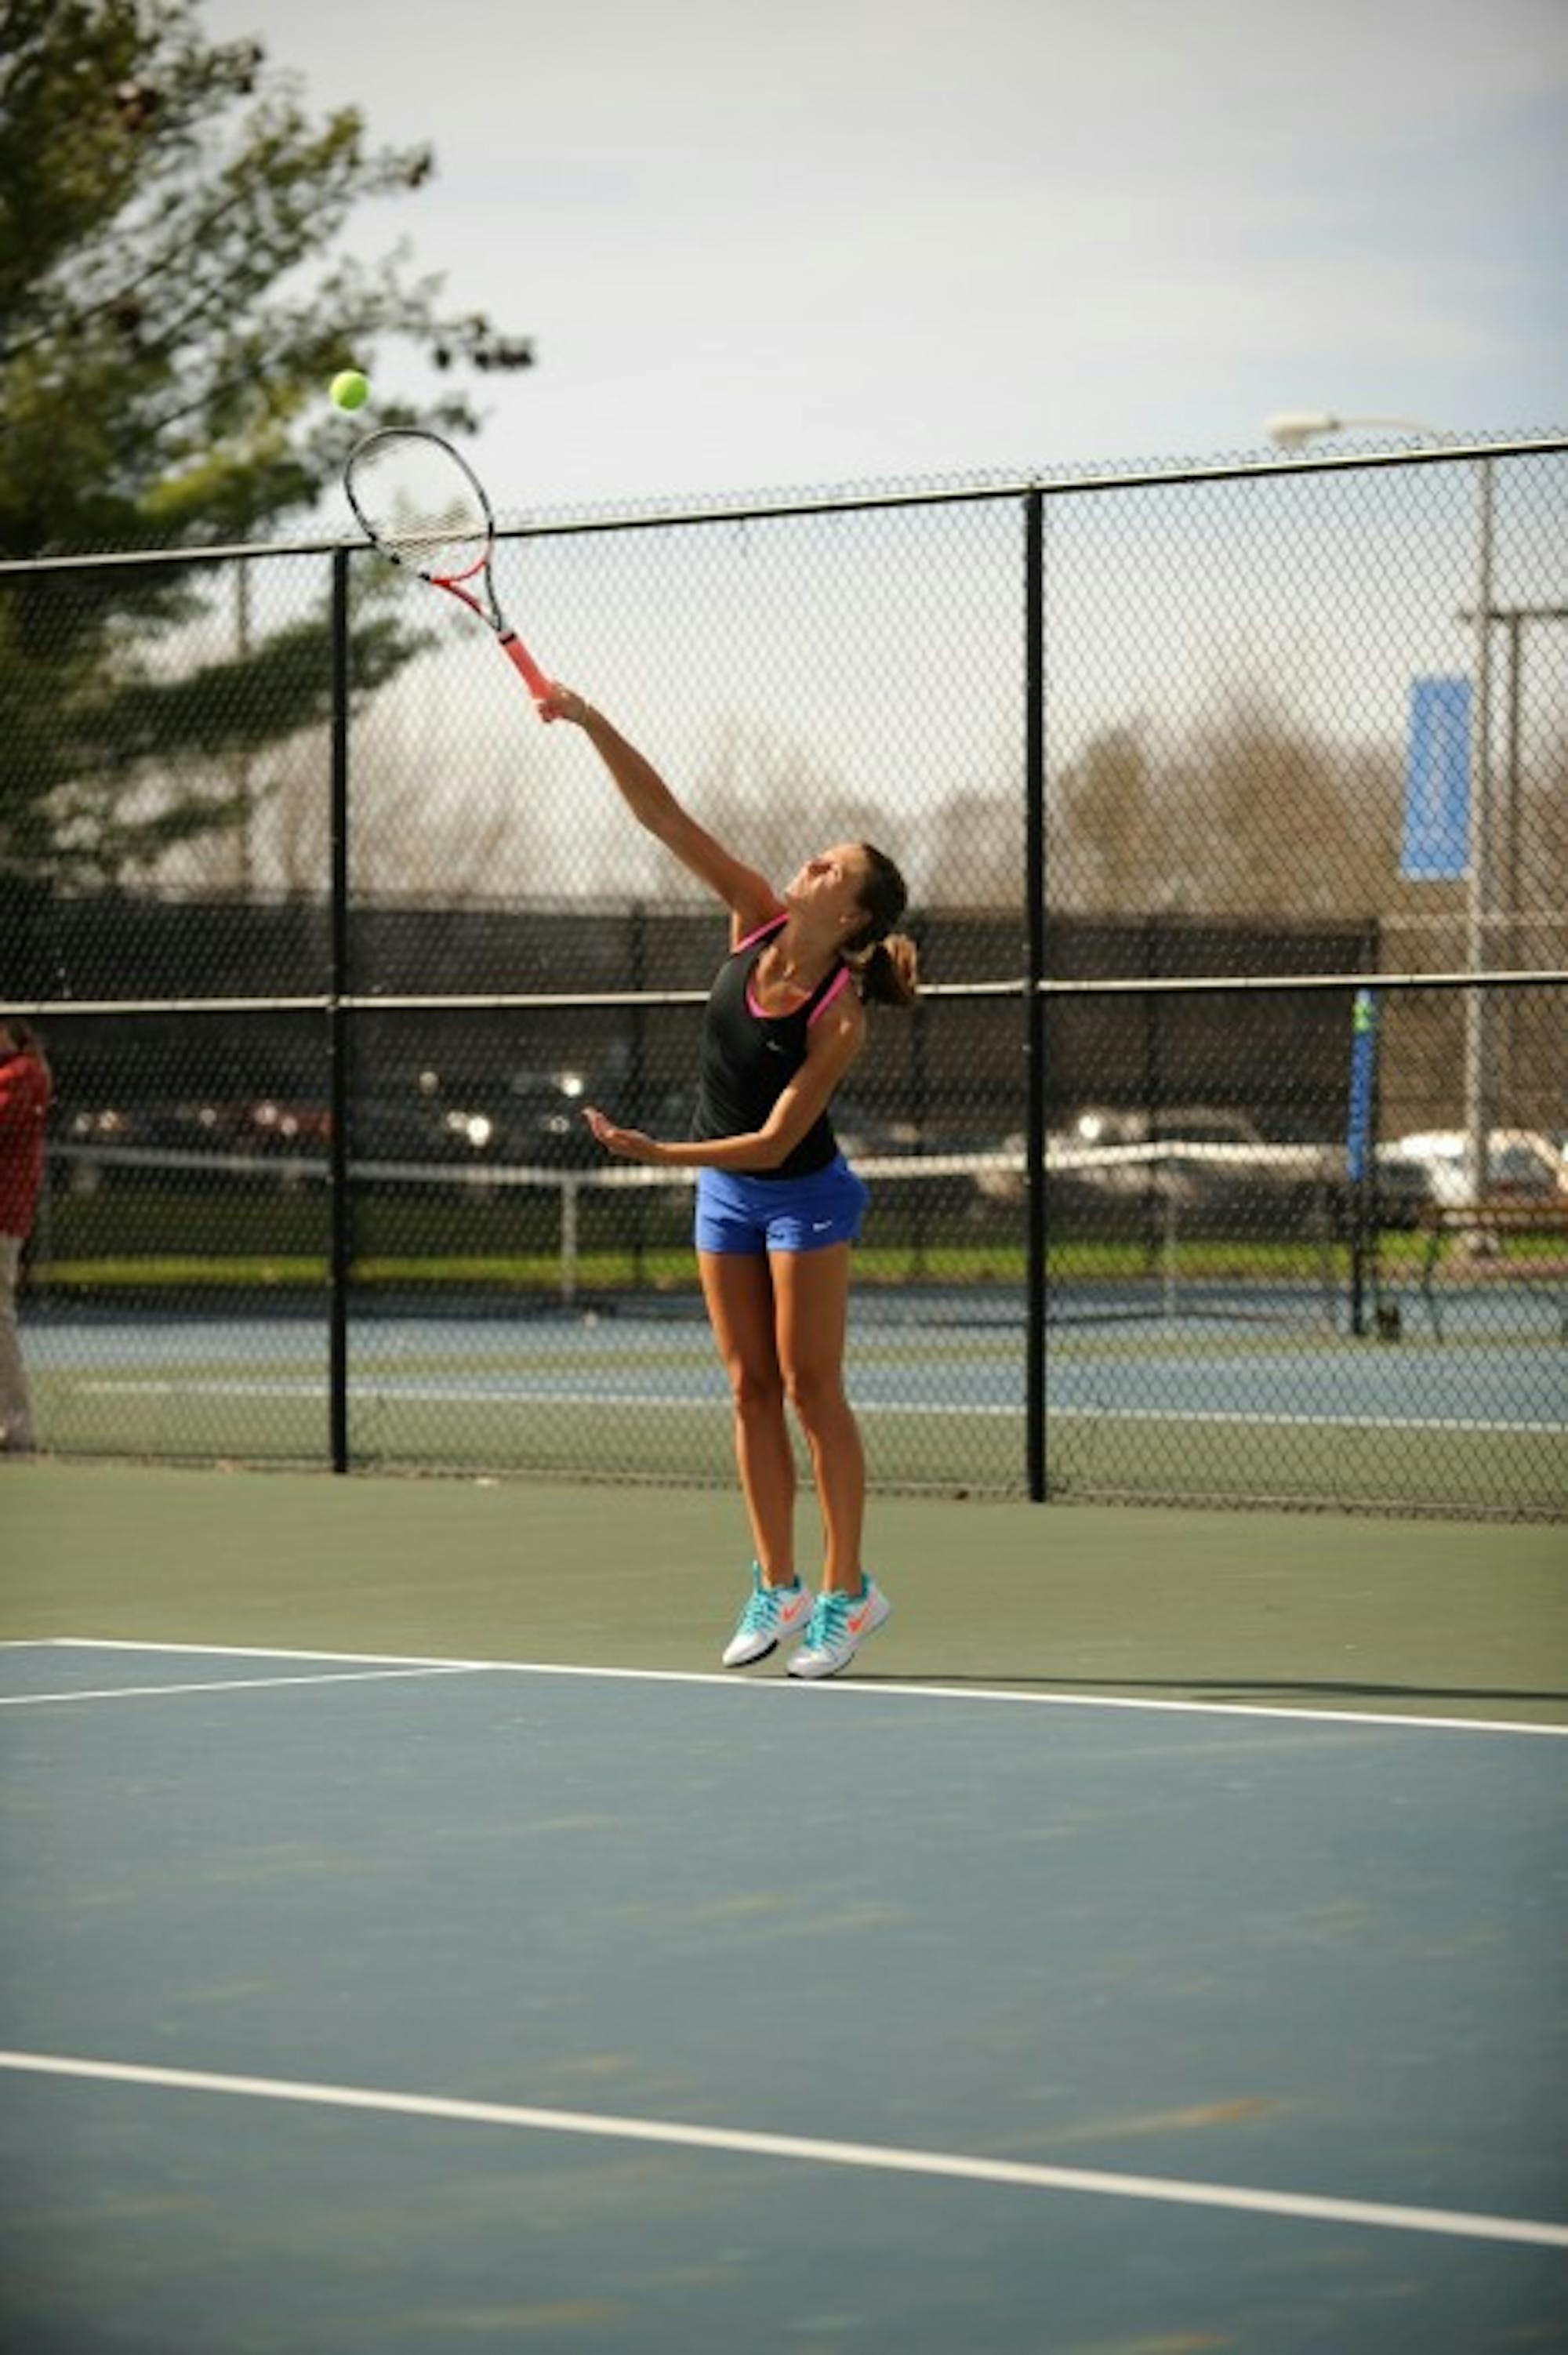 Belles senior Kayle Sexton starts a rally during Saint Mary’s 8-1 win over Adrian on April 14 at Saint Mary’s Tennis Courts.